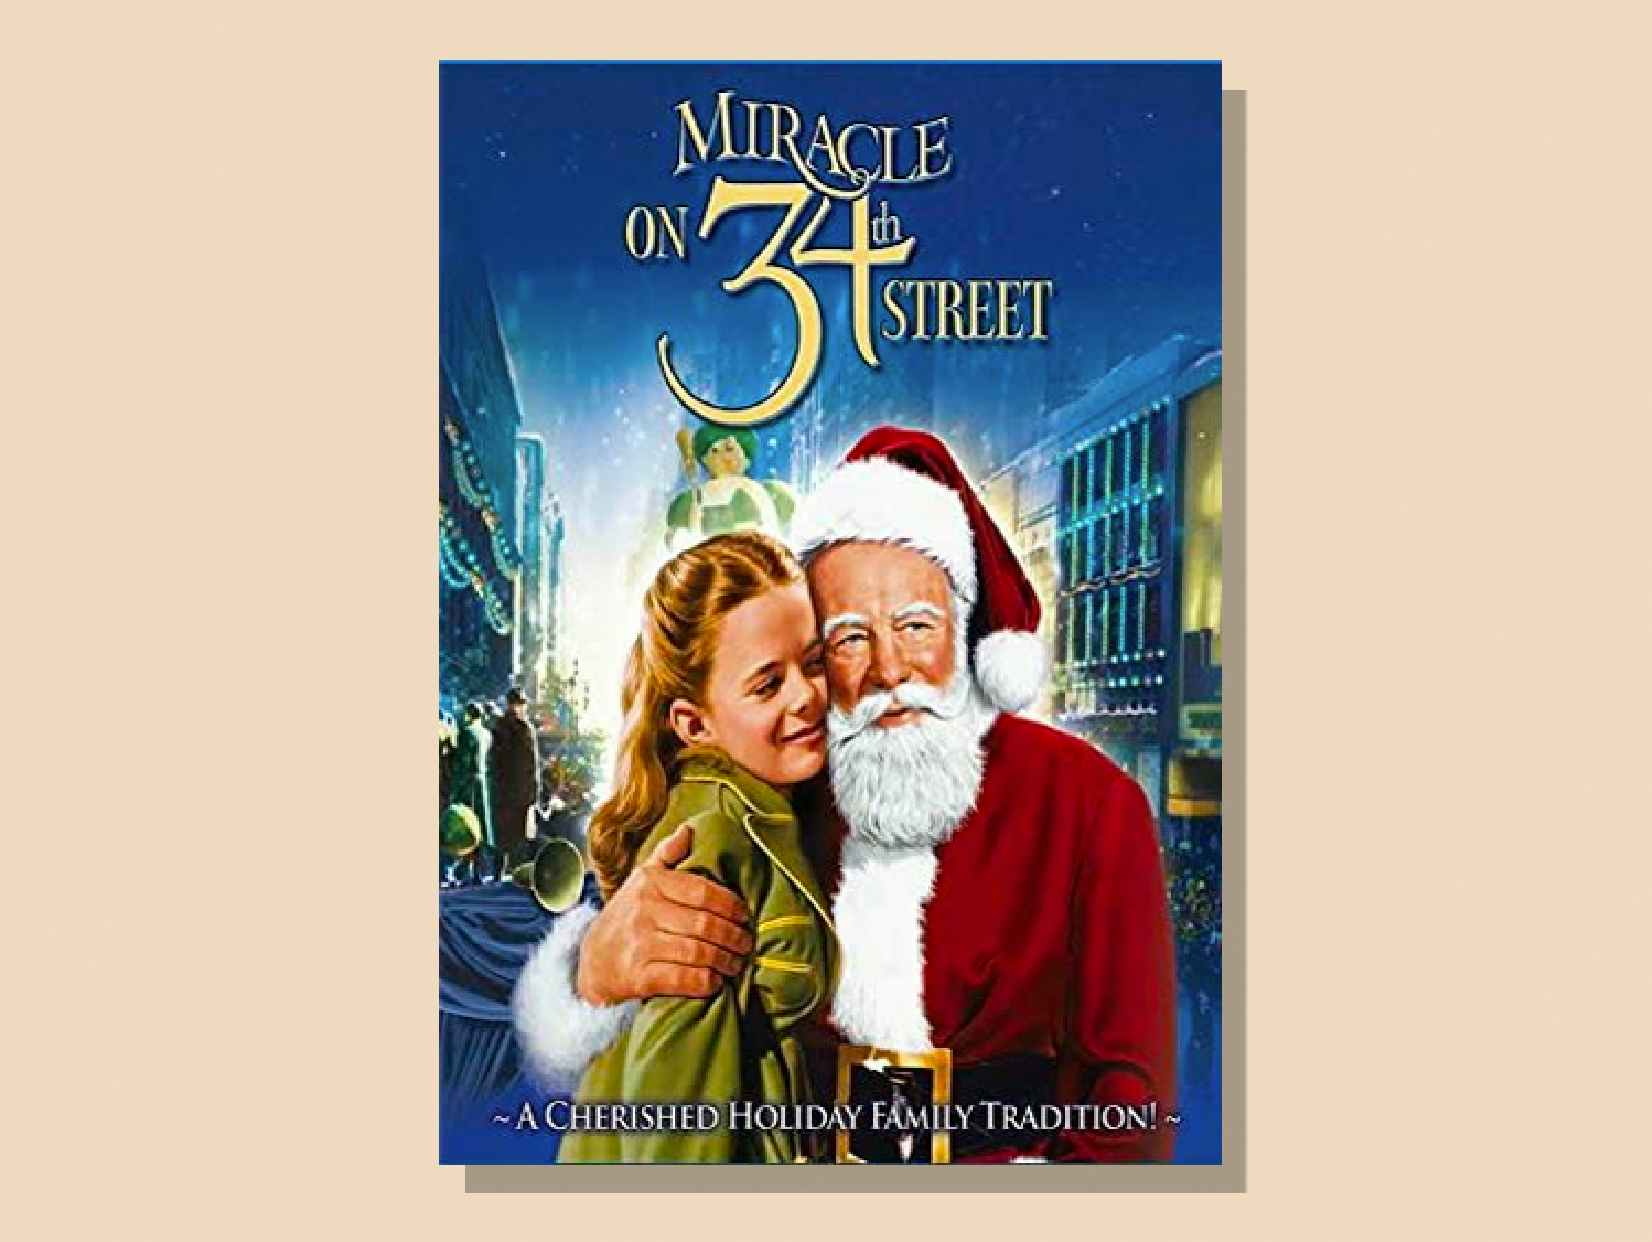 Miracle on 34th Street, one of the best kids thanksgiving movies